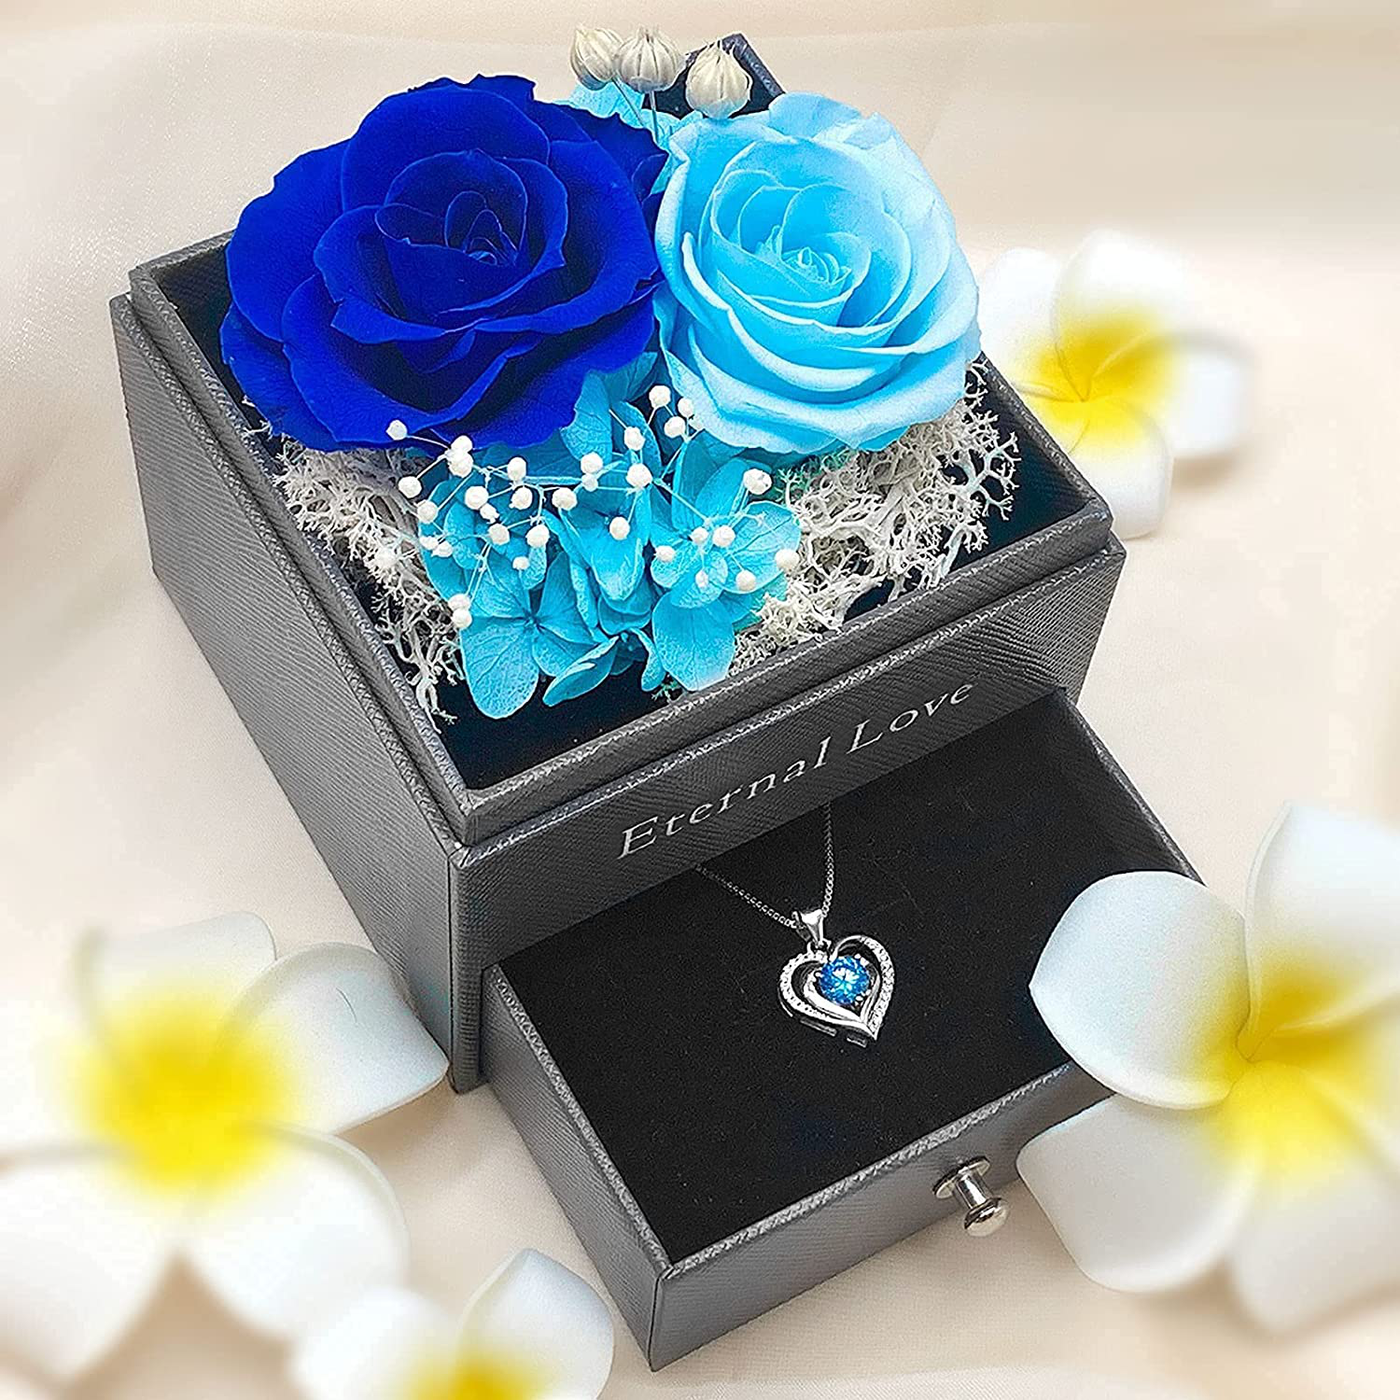 ATLYEROZ Eternal Rose with 14K Gold Plated Heart Necklace,Handmade Preserved Real Rose with Card Romantic Gift for Her,Girlfriend,Mother,Wife on Valentine's Day,Anniversary,Birthday,Xmas(Blue)